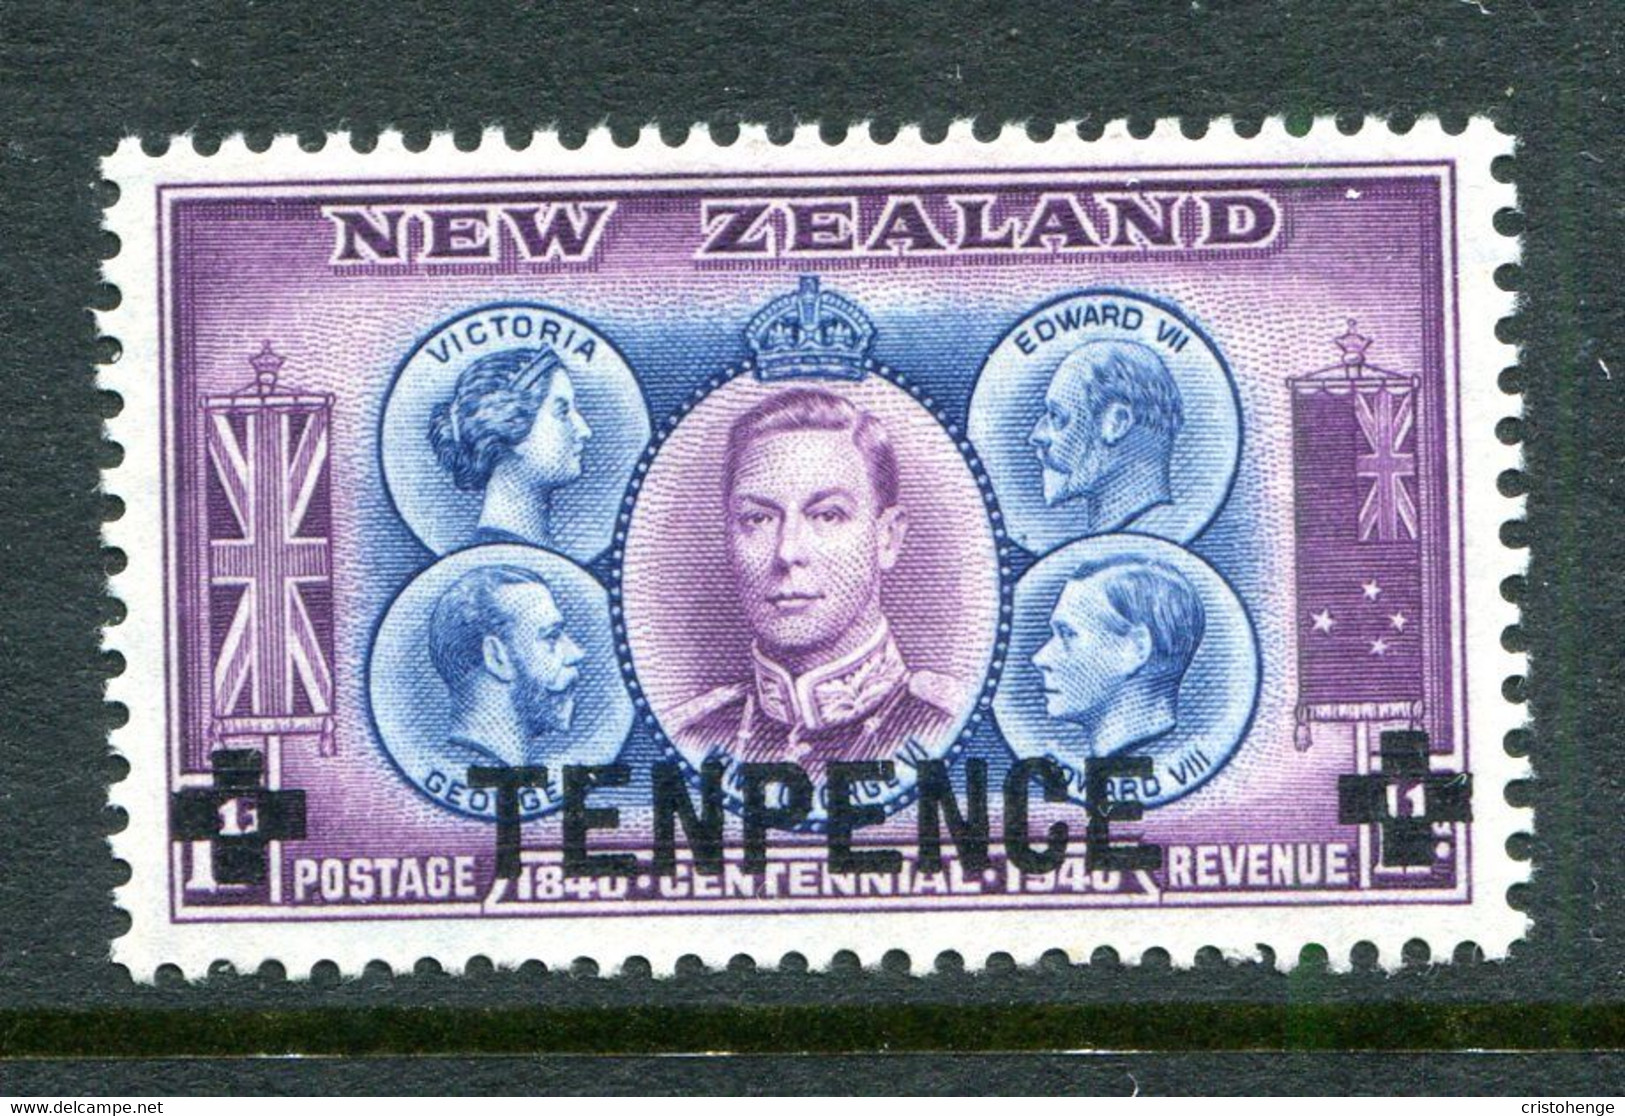 New Zealand 1944 10d Surcharge HM (SG 662) - Unused Stamps